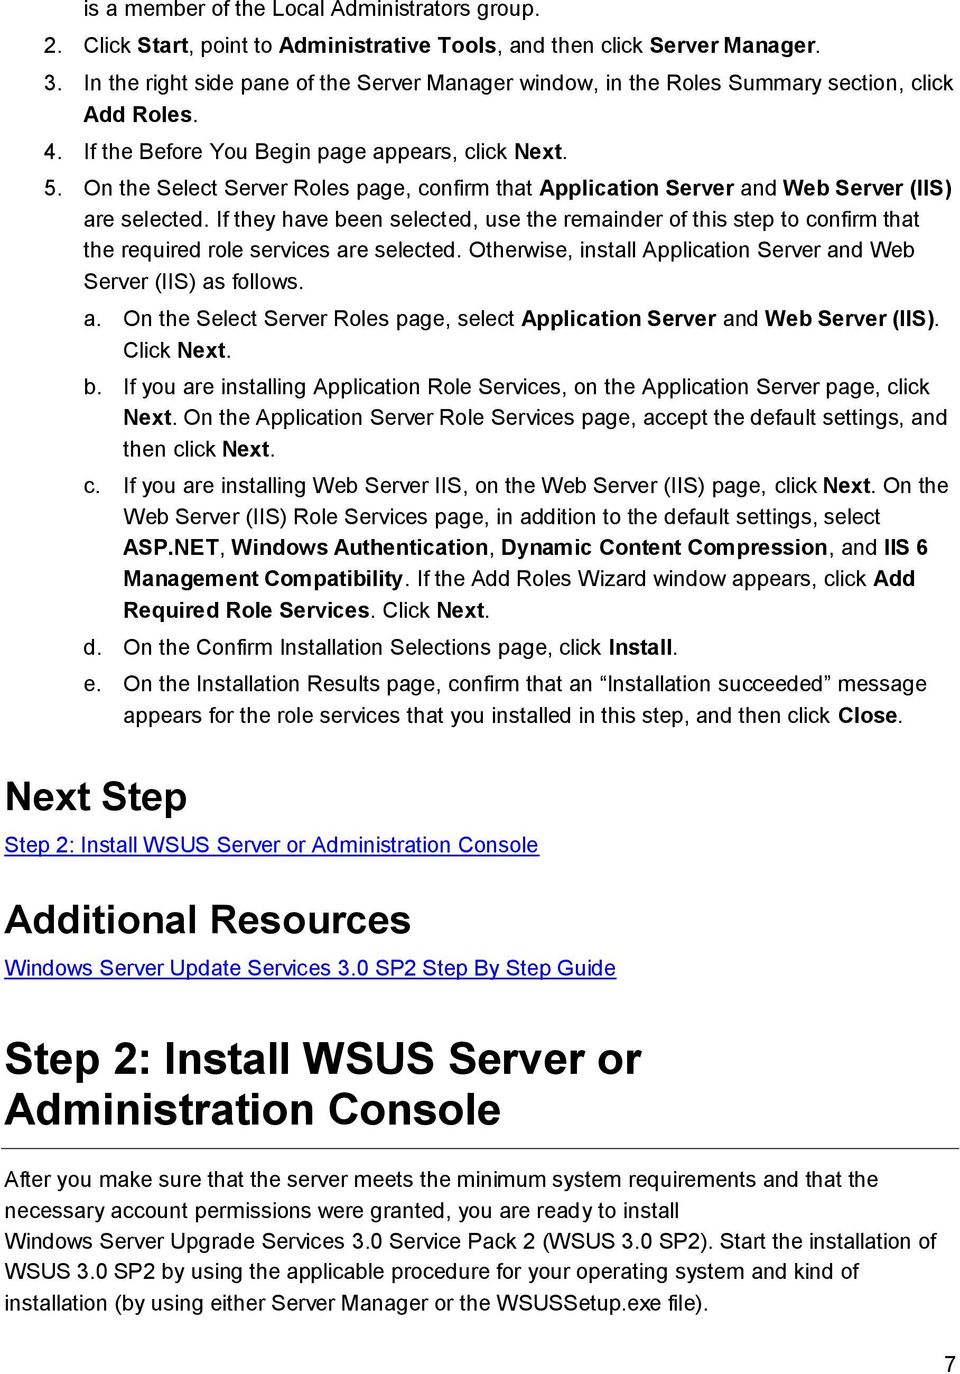 On the Select Server Roles page, confirm that Application Server and Web Server (IIS) are selected.